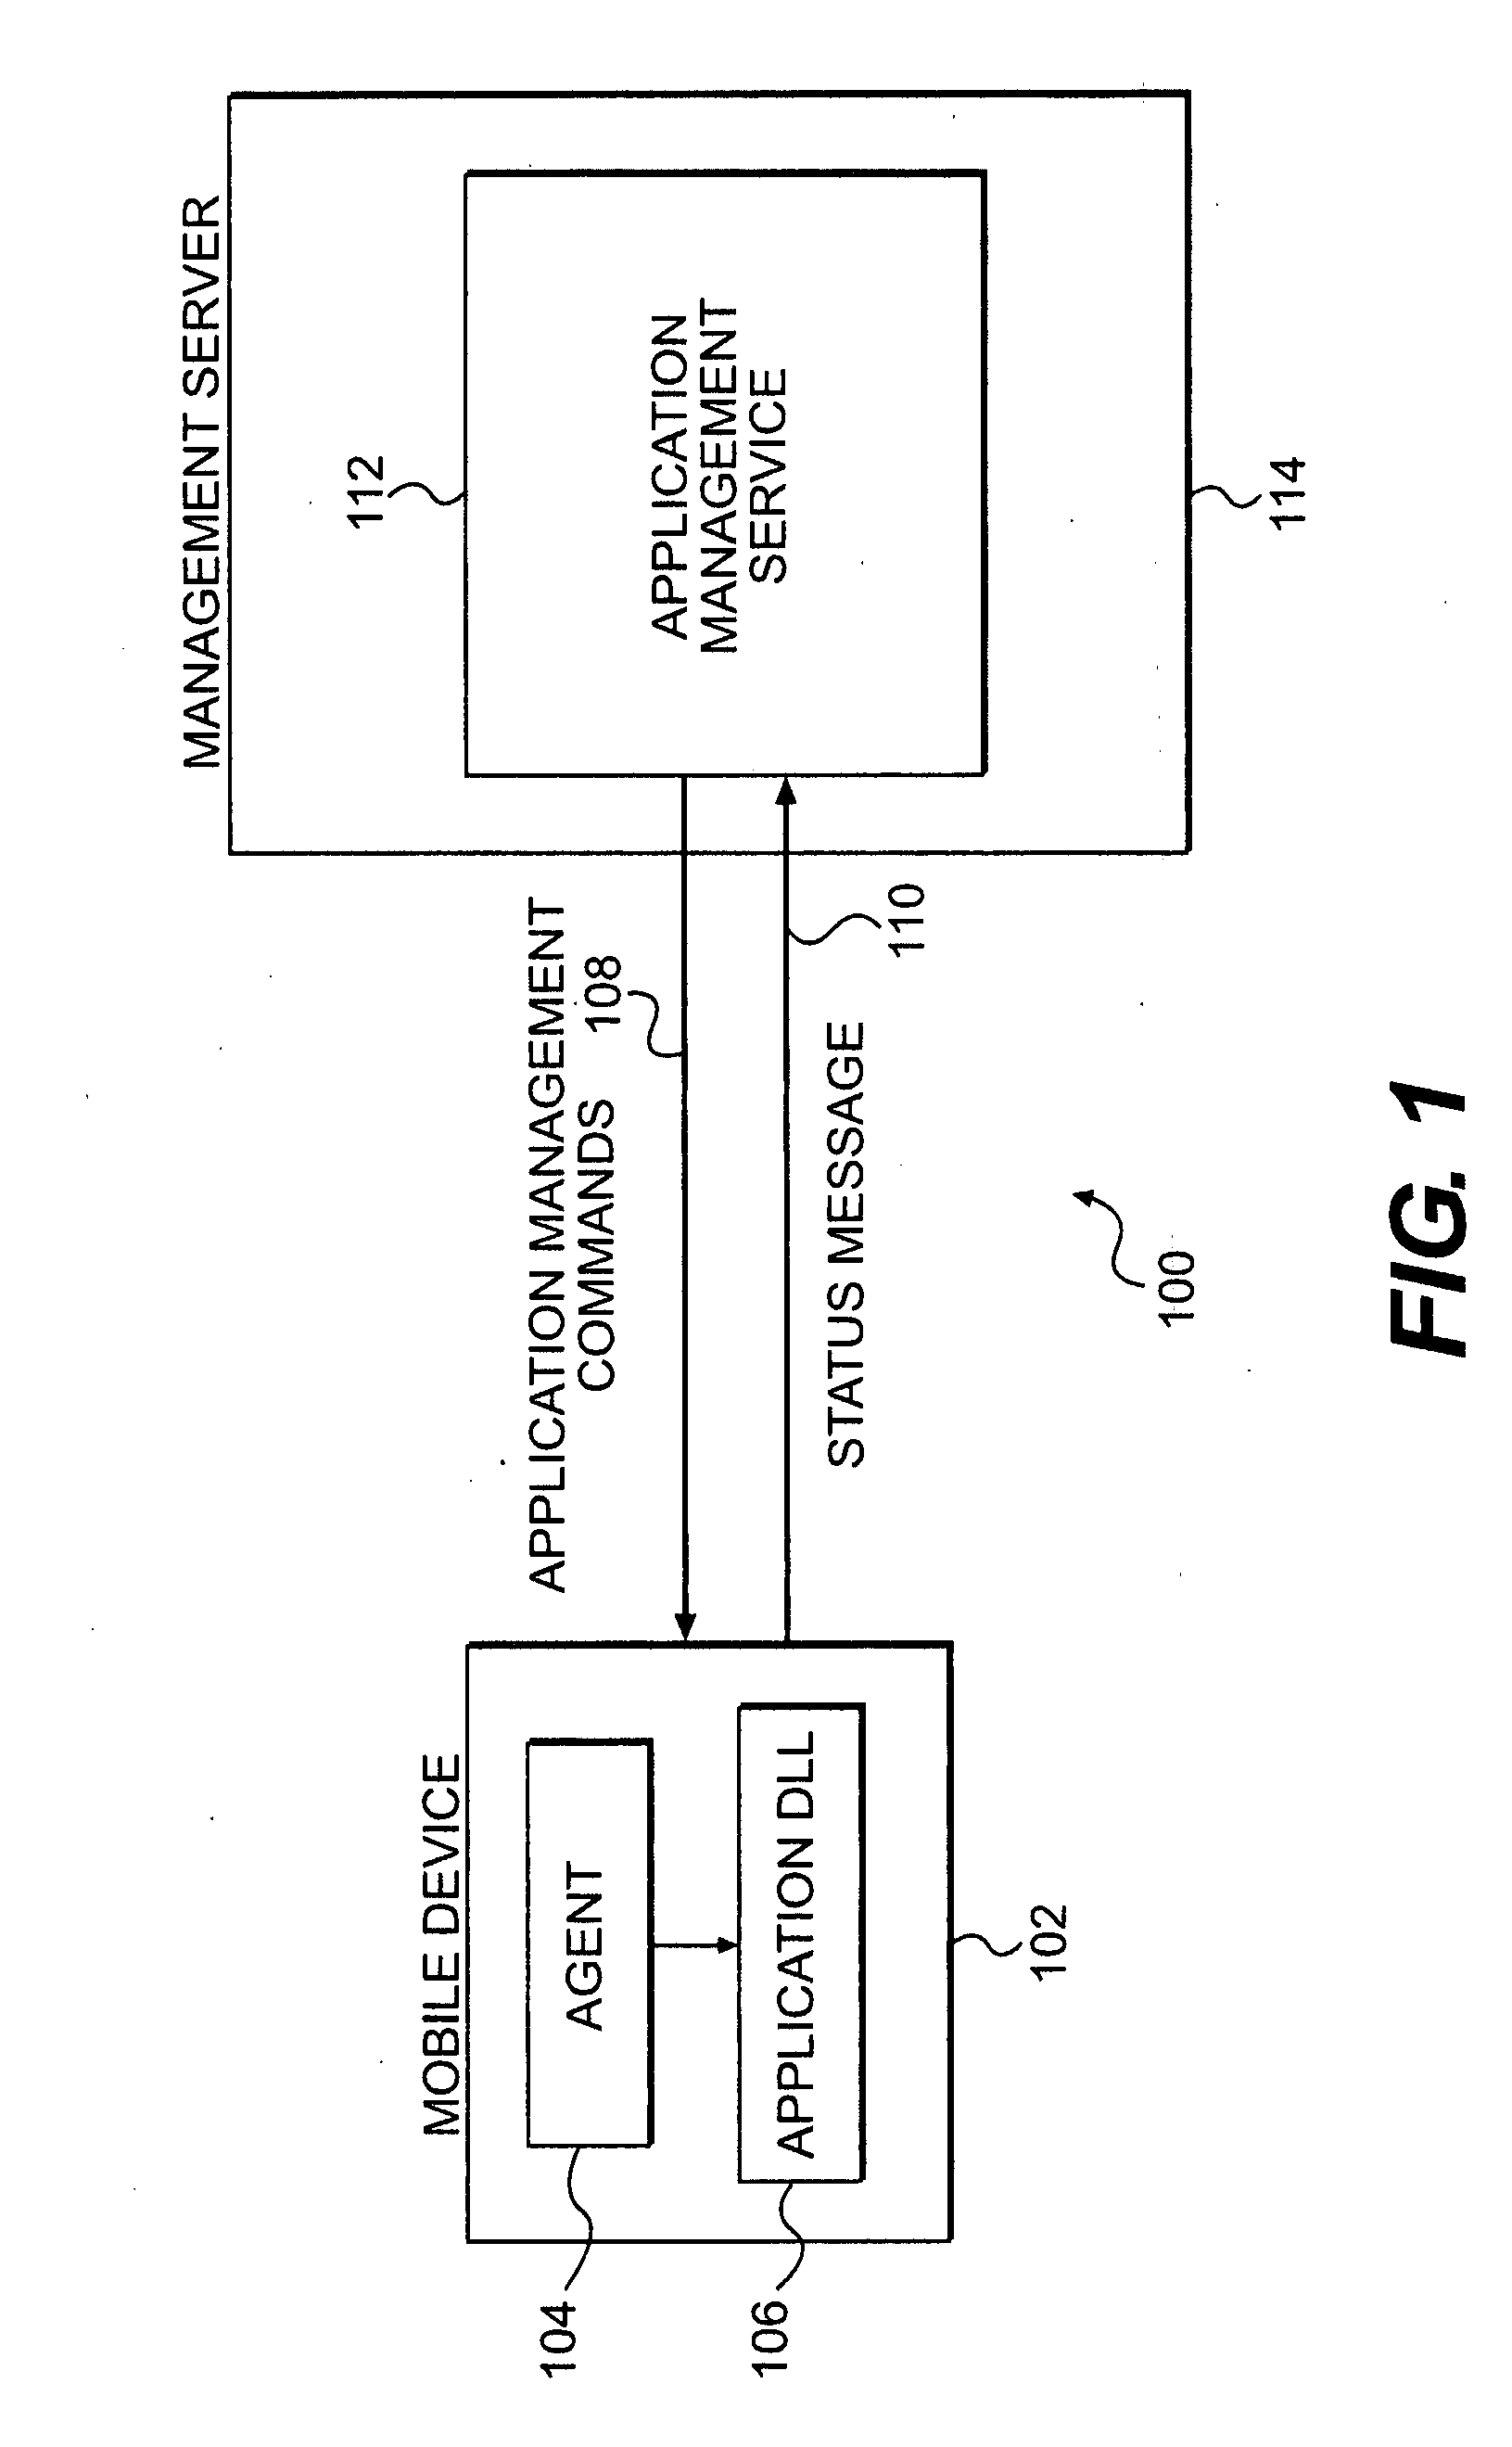 System and method to provide application management on wireless data terminals by means of device management agent and dynamic link libraries